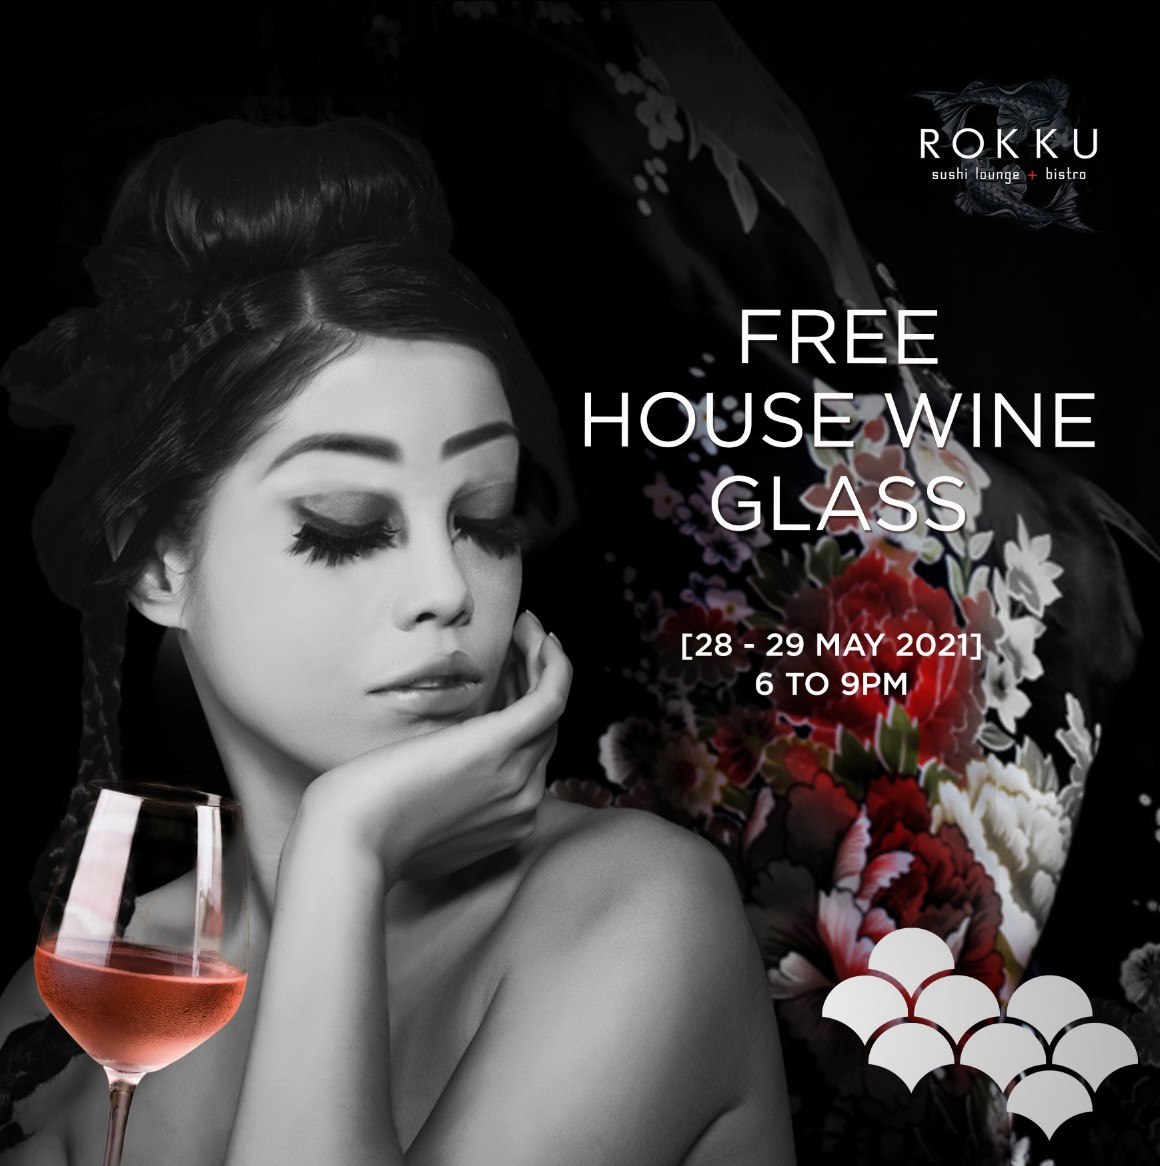 FREE HOUSE WINE GLASS AT ROKKU ON MAY 28TH – 29TH